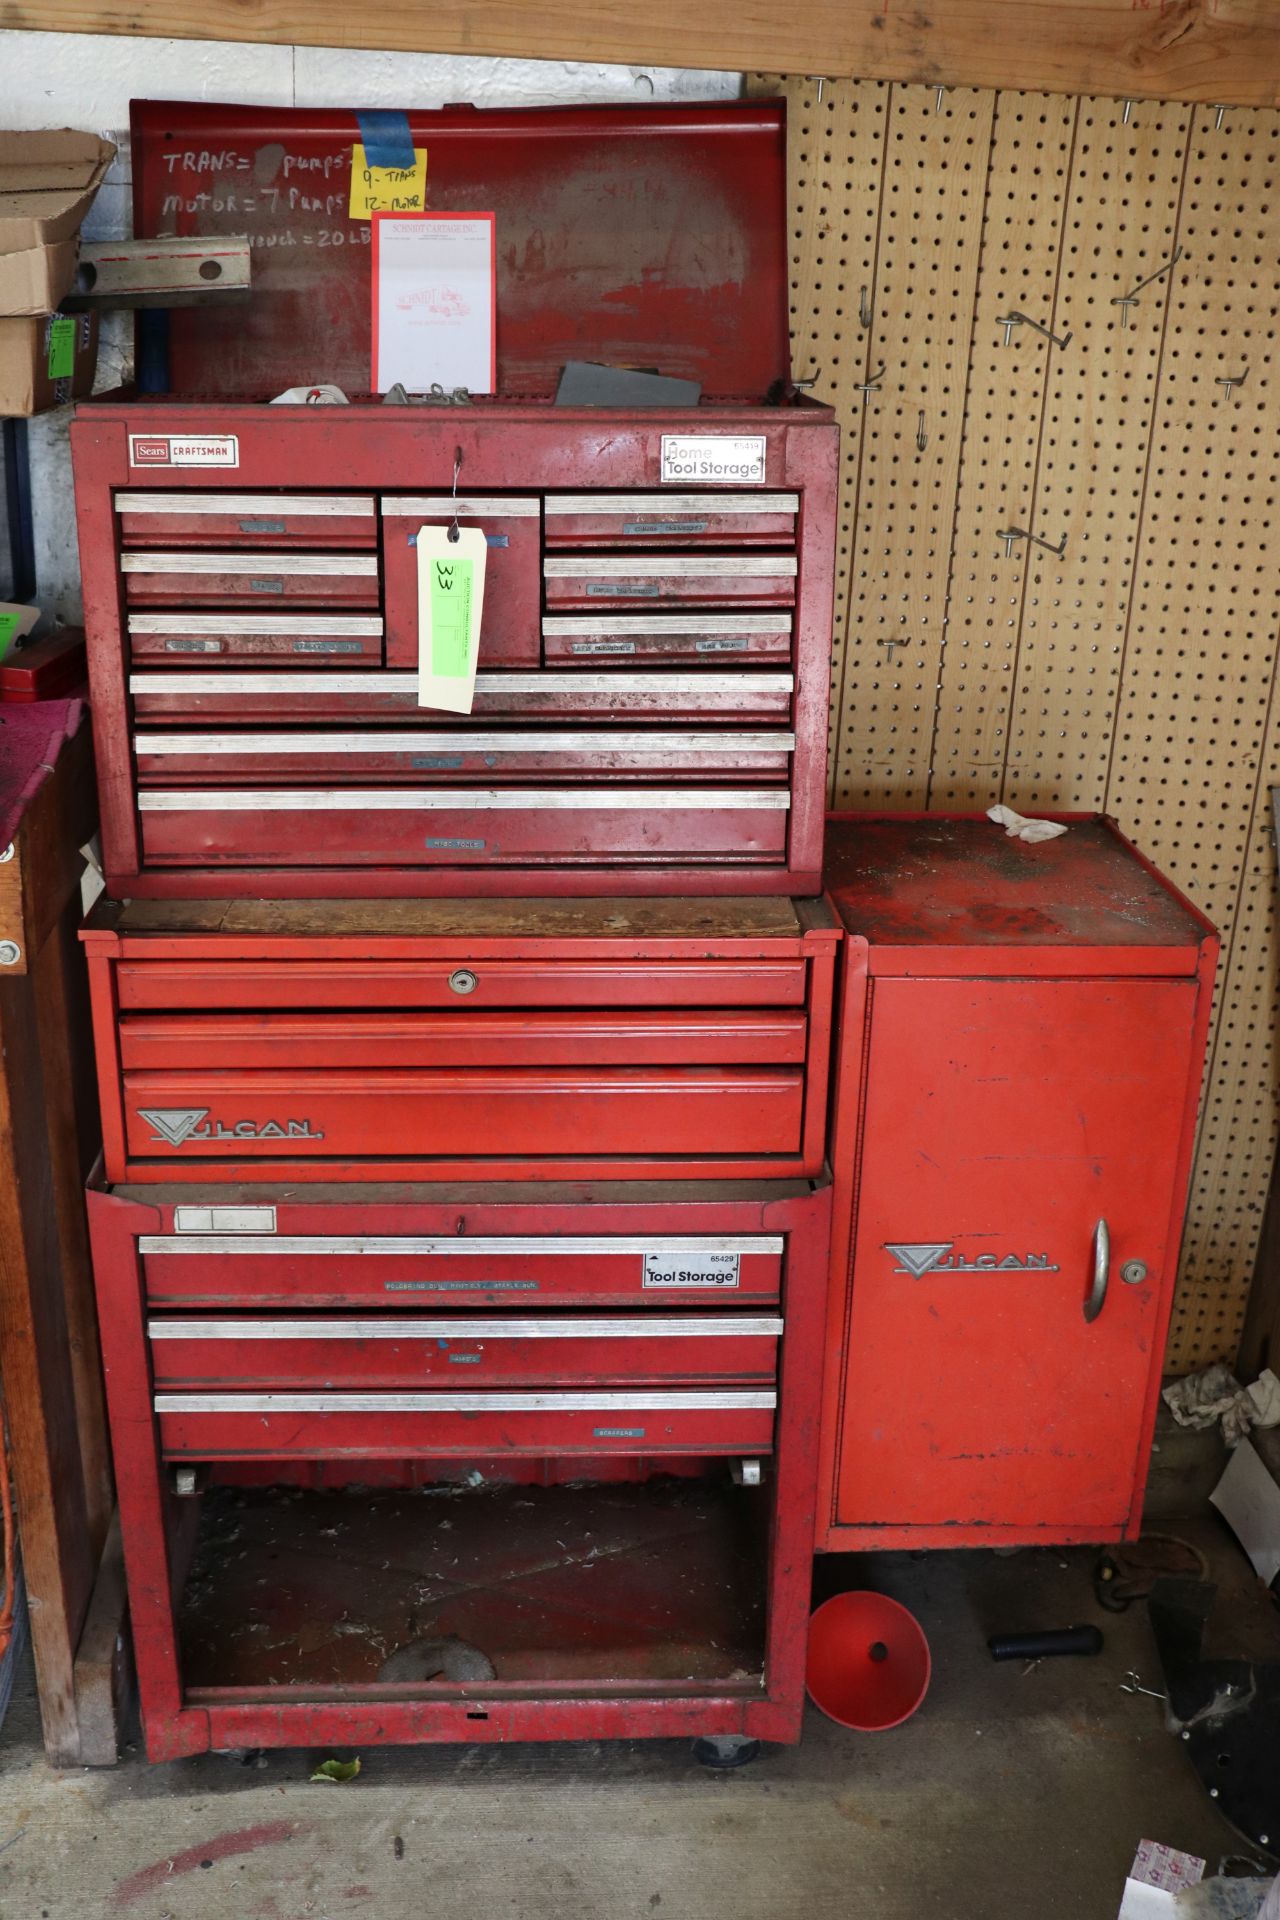 Sears Craftsman tool chest on top of a Vulcan tool chest